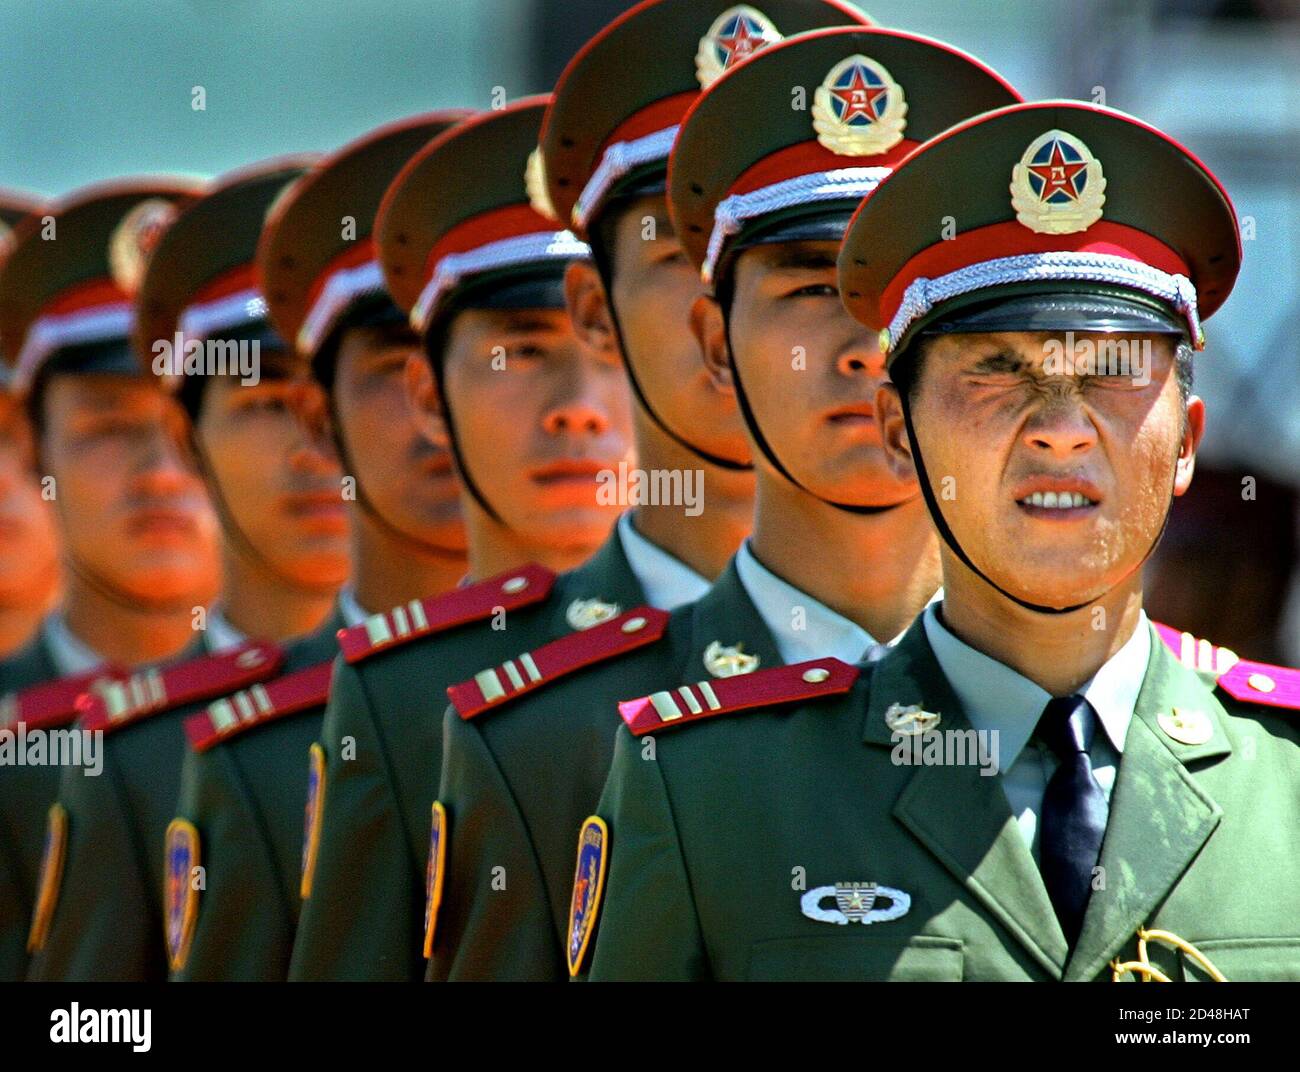 Soldiers of the People's Liberation Army of China (PLA) line up before  parade in Hong Kong, August 1, 2004. Today marked the 77th anniversary of  the PLA which won control of mainland